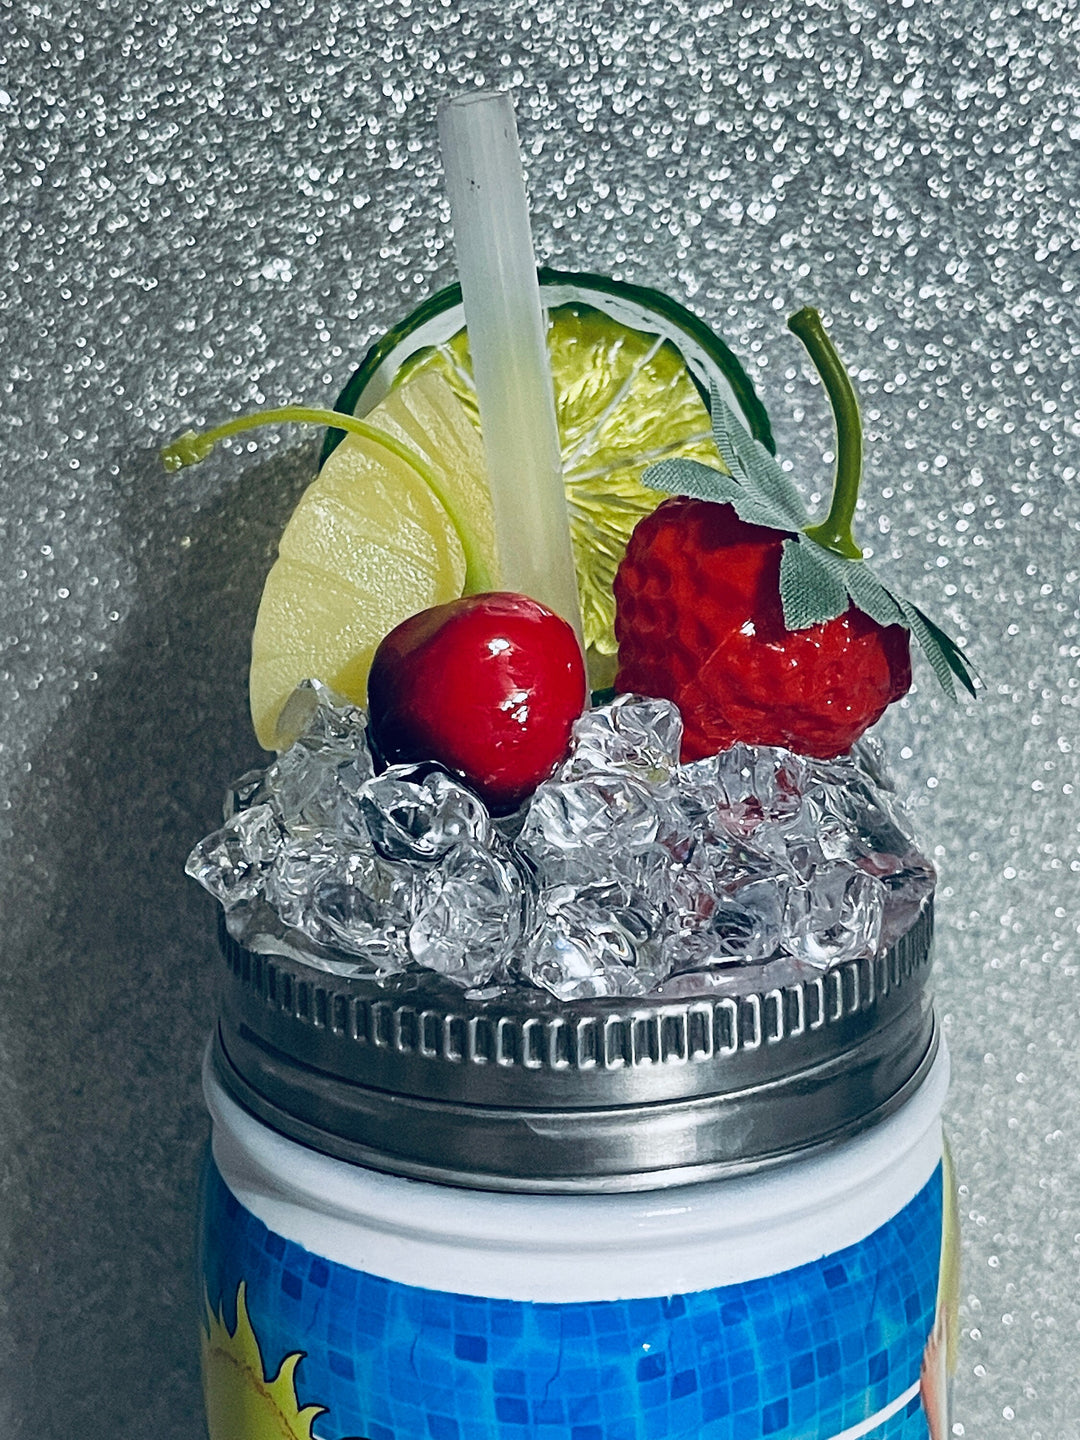 Strawberry + Lime + Cherry + Pineapple - Fruit Tumbler Topper - Fits 17 oz Stainless MASON JAR Tumbler Top - Fruit Topped Tumbler Toppers